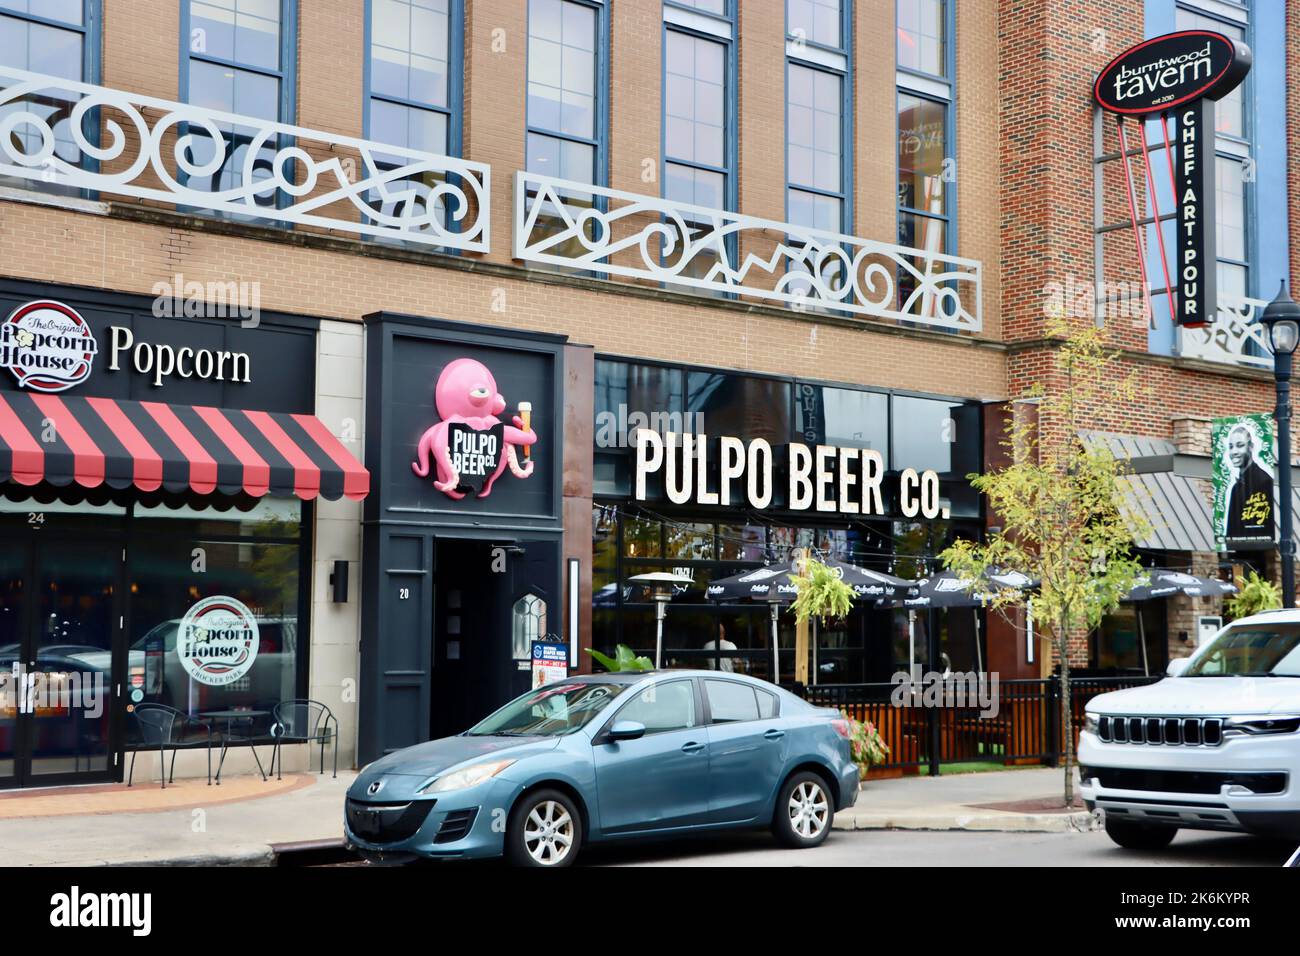 Pulpo Beer company and Popcorn house in Crocker Park in Westlake, Ohio Stock Photo